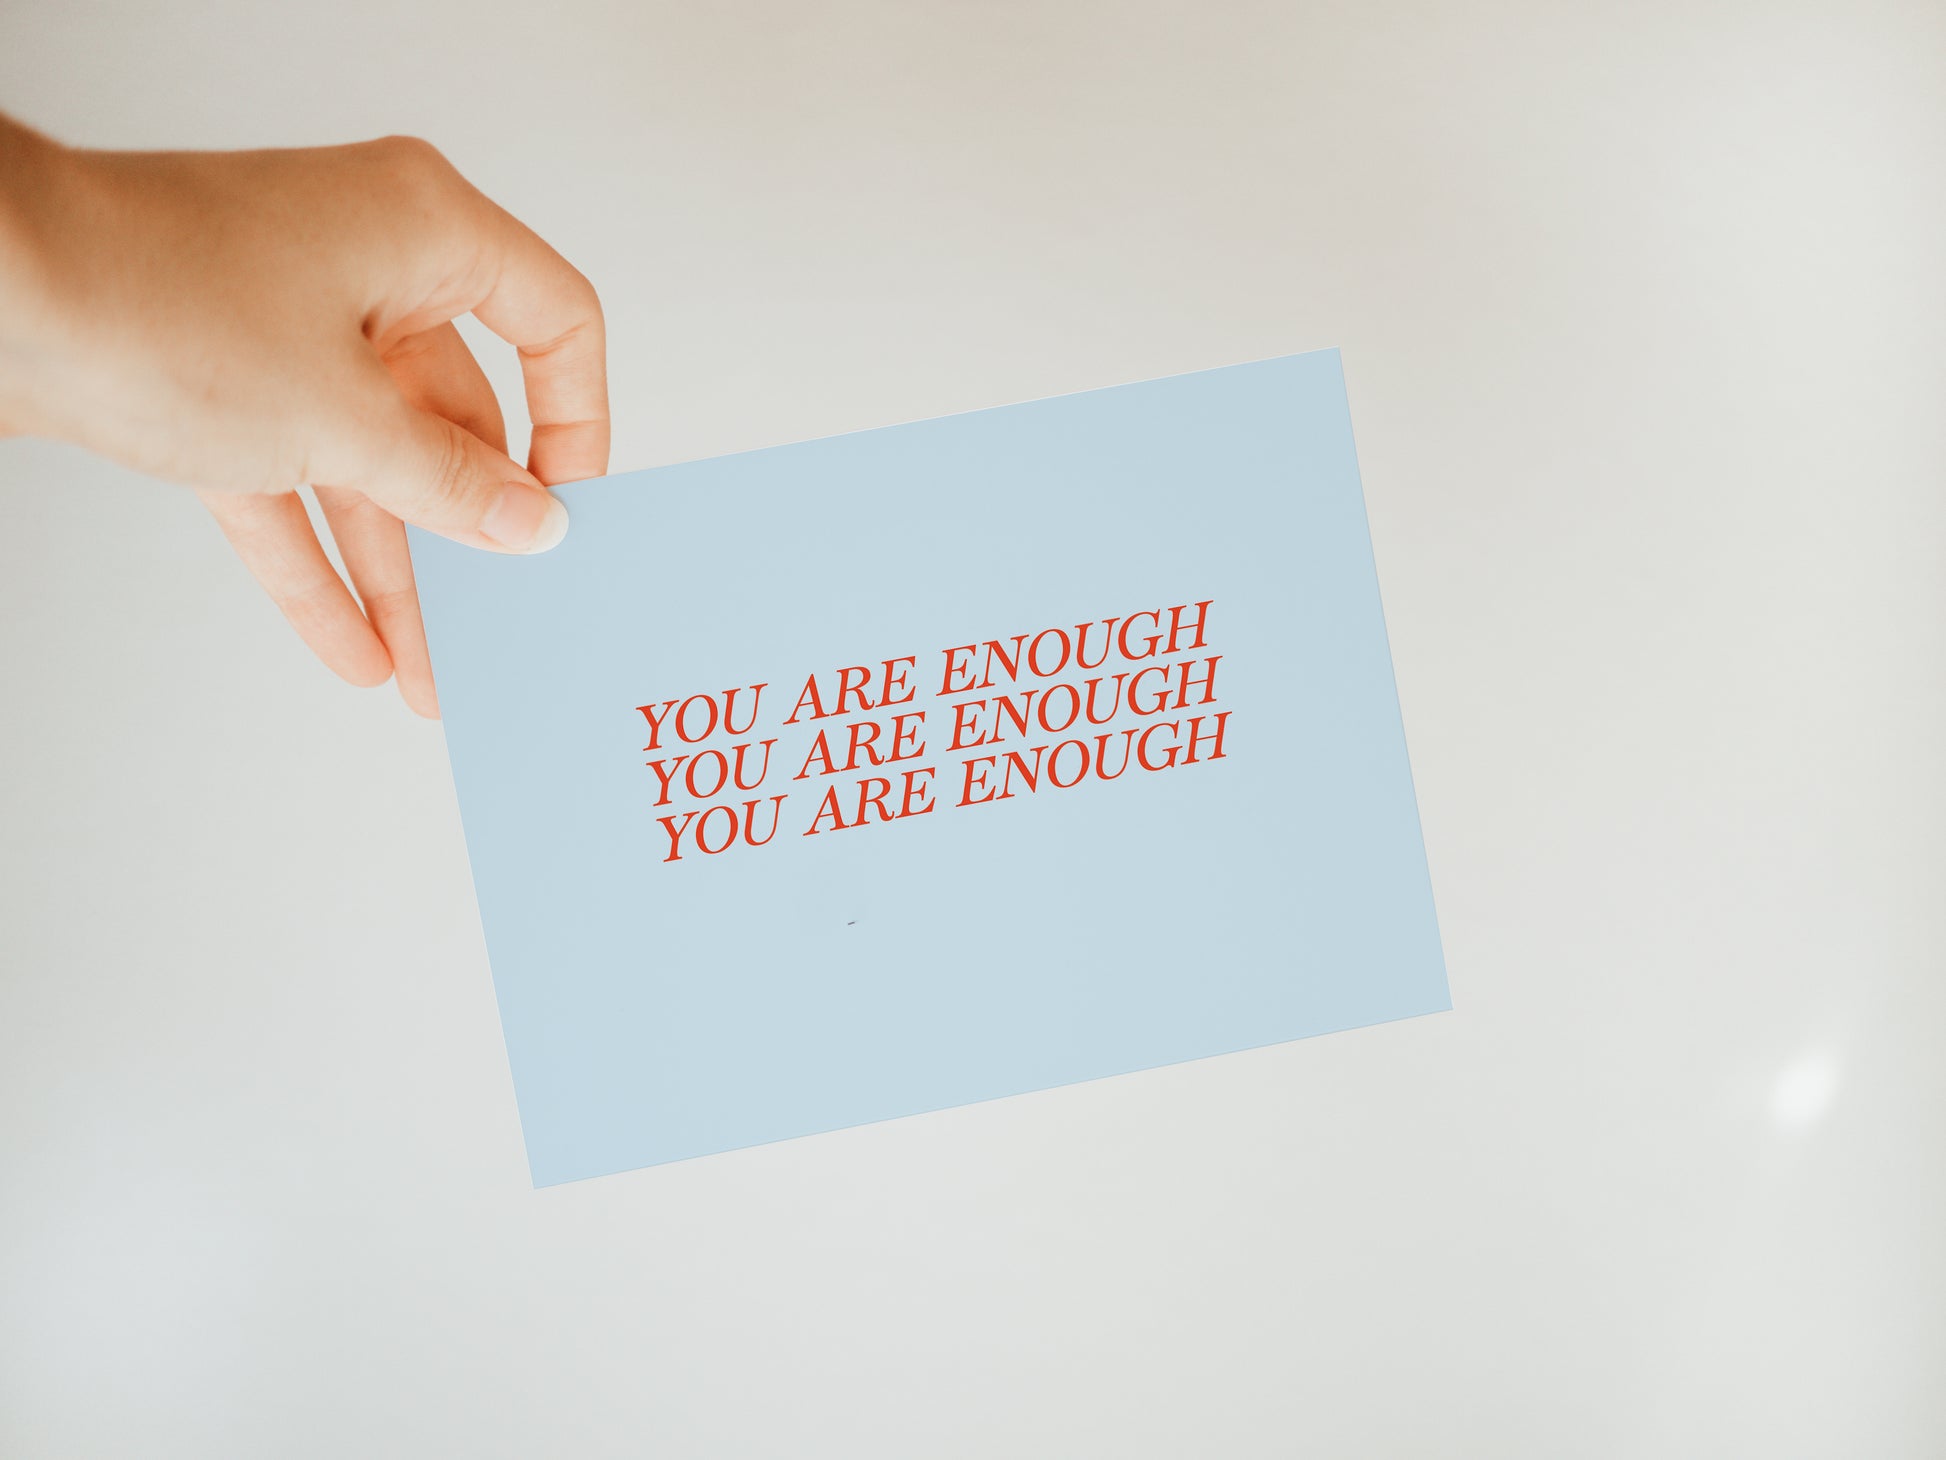 hand holding a light blue greeting card with the words "you are enough" repeated three times on the front in red font